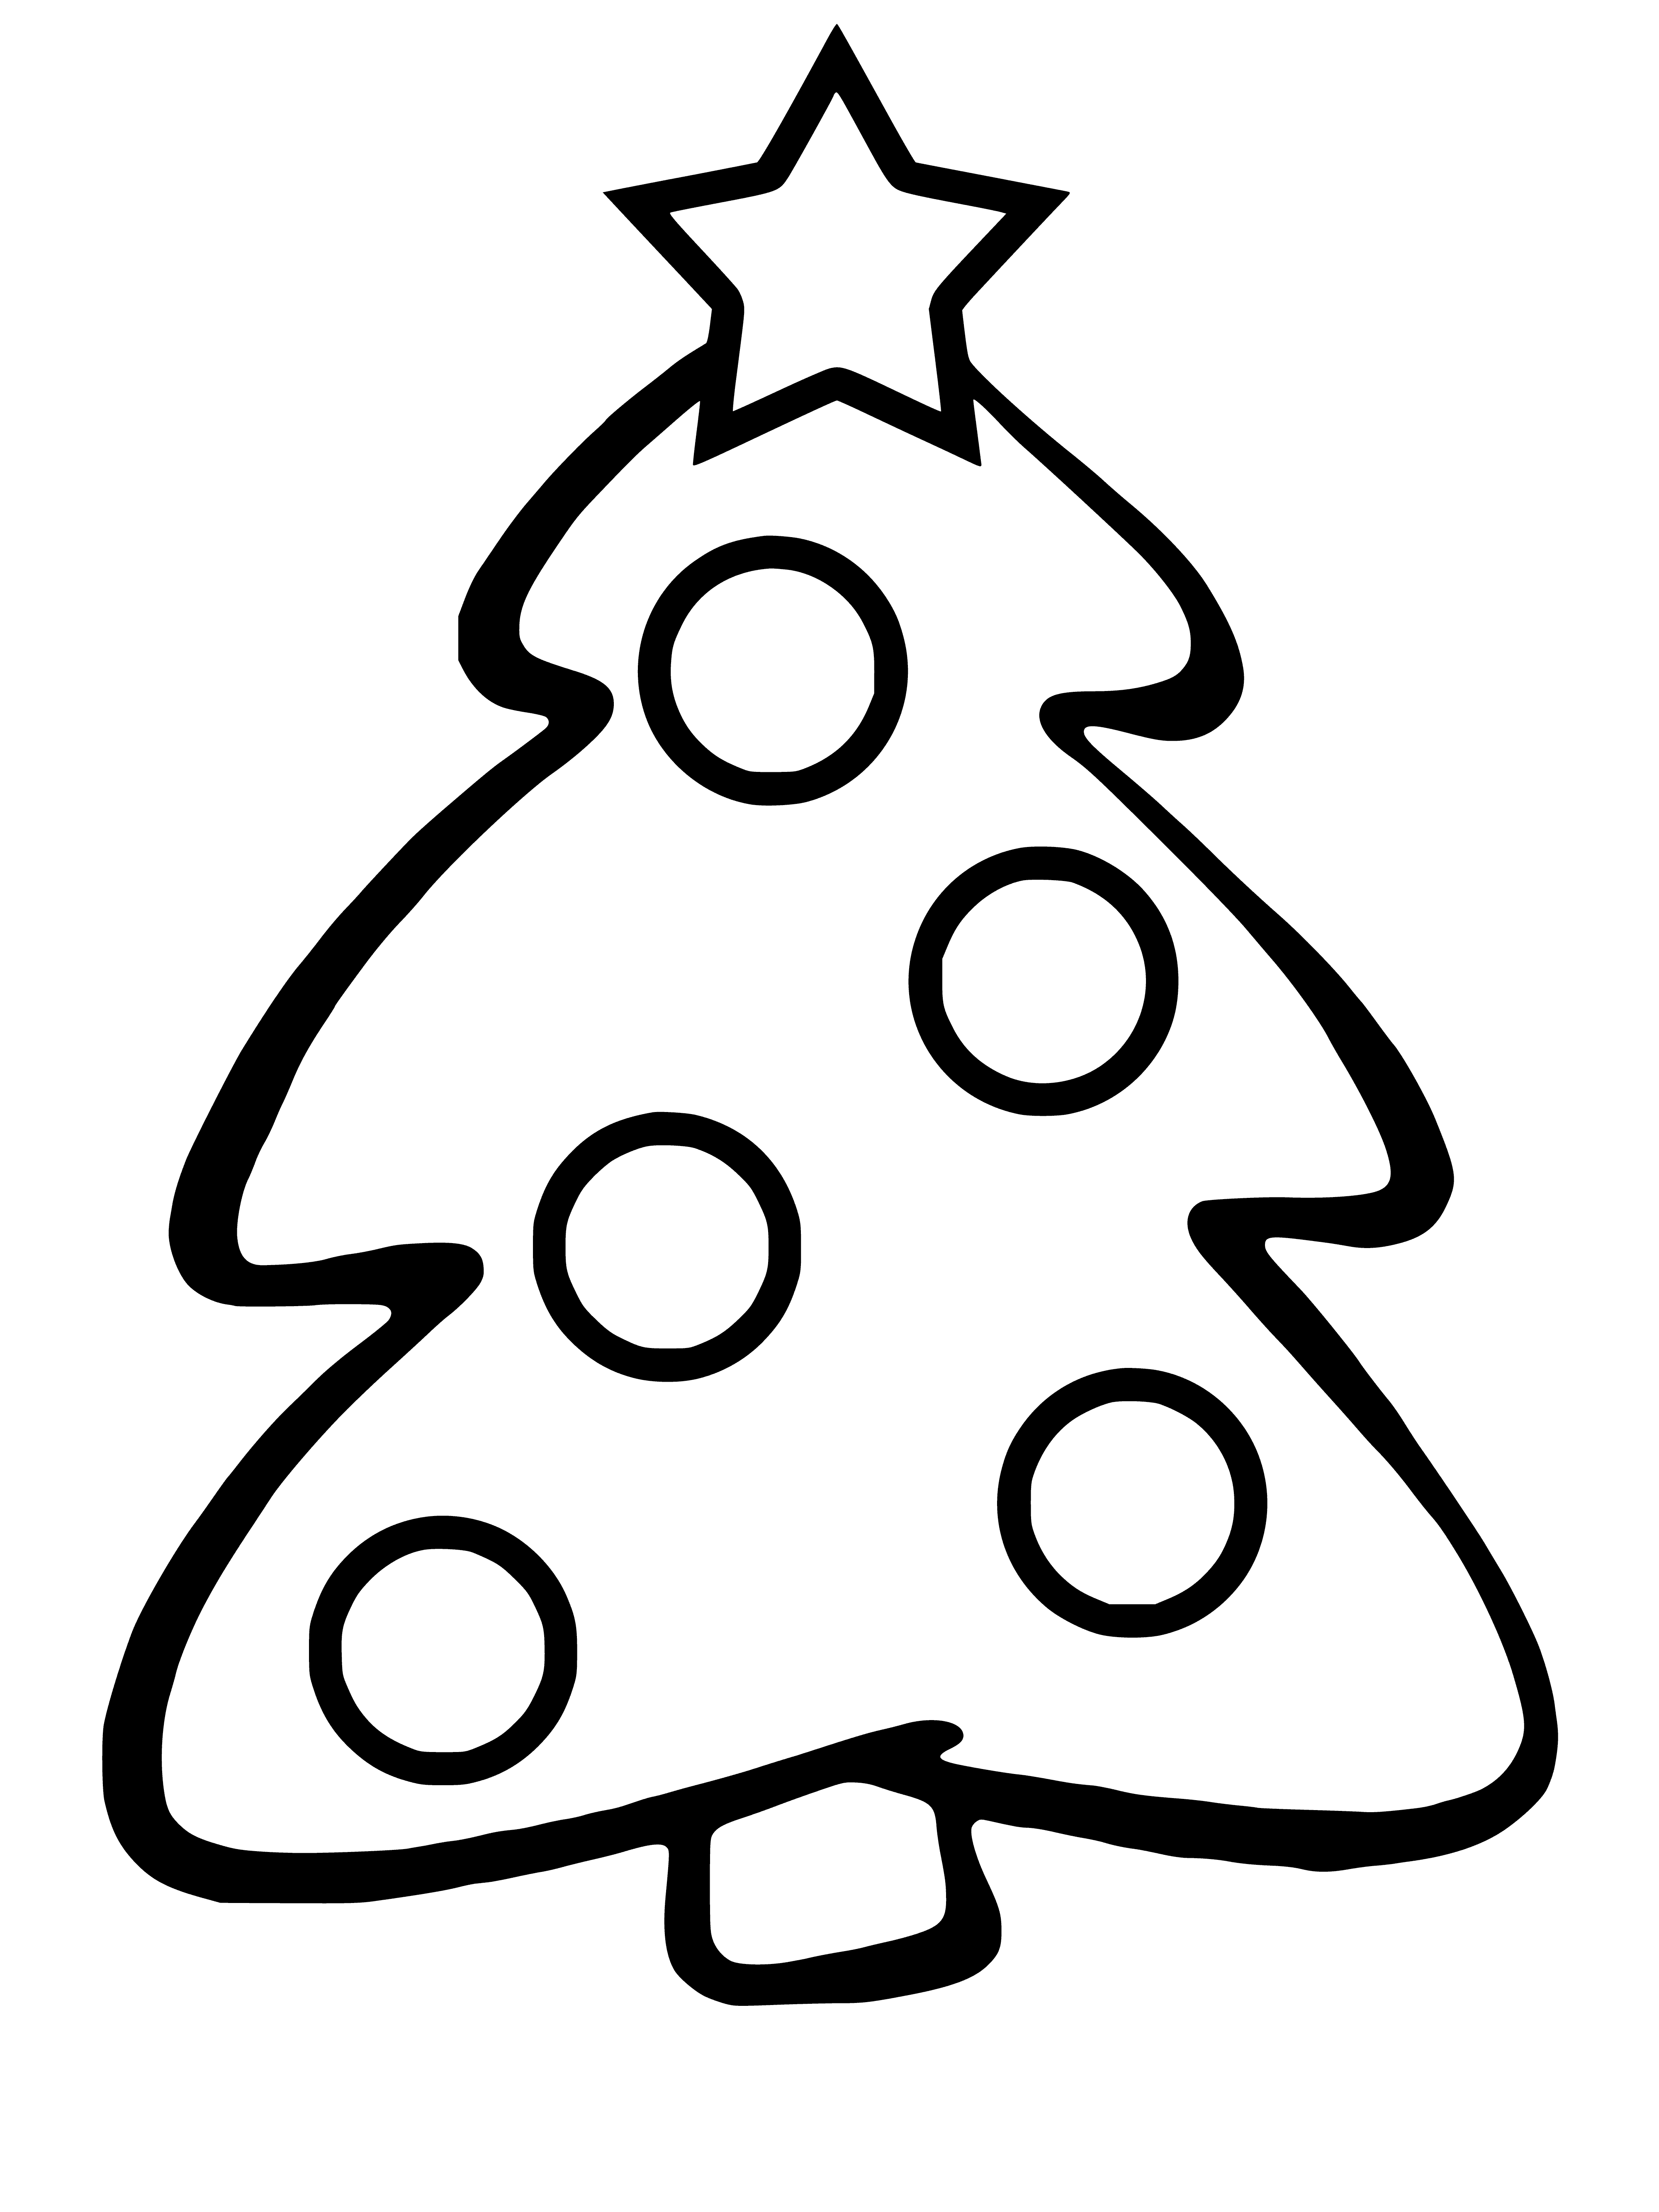 coloring page: Christmas tree with presents and ornaments, a red toy train on left, green toy frog on right and a yellow star in the middle.